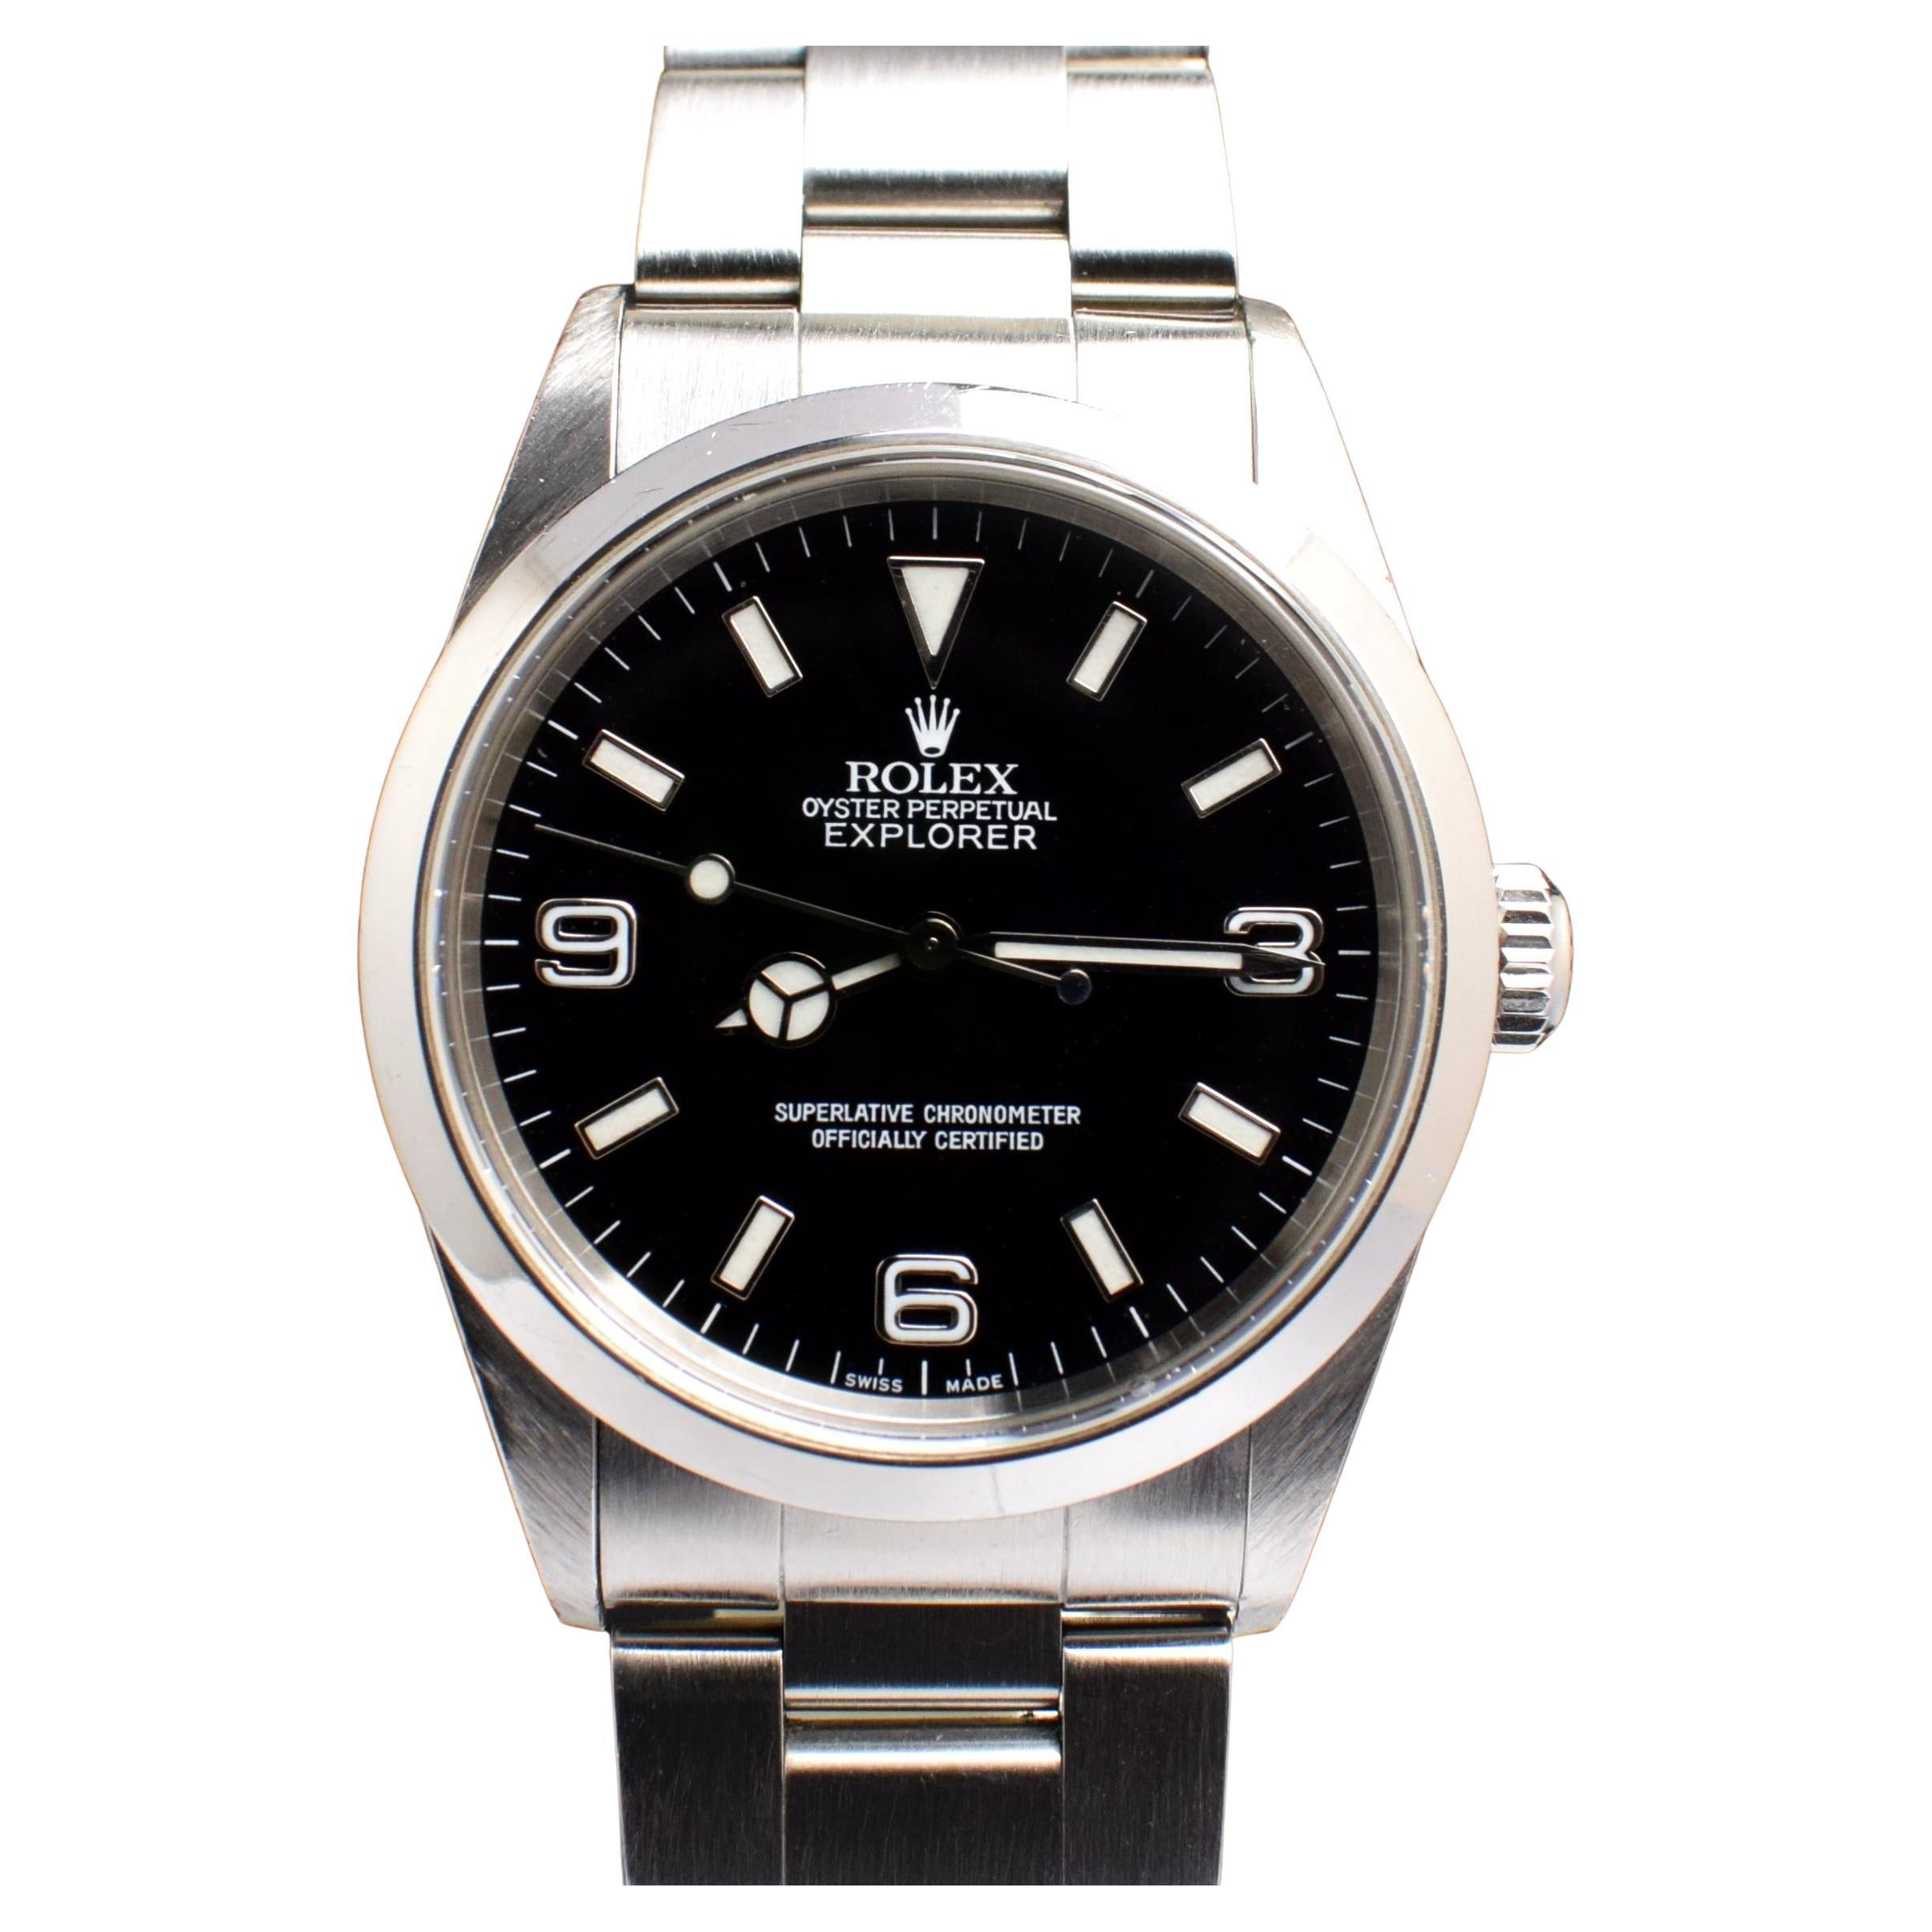 Rolex Explorer I Steel 14270 Automatic Watch with Paper, 2000